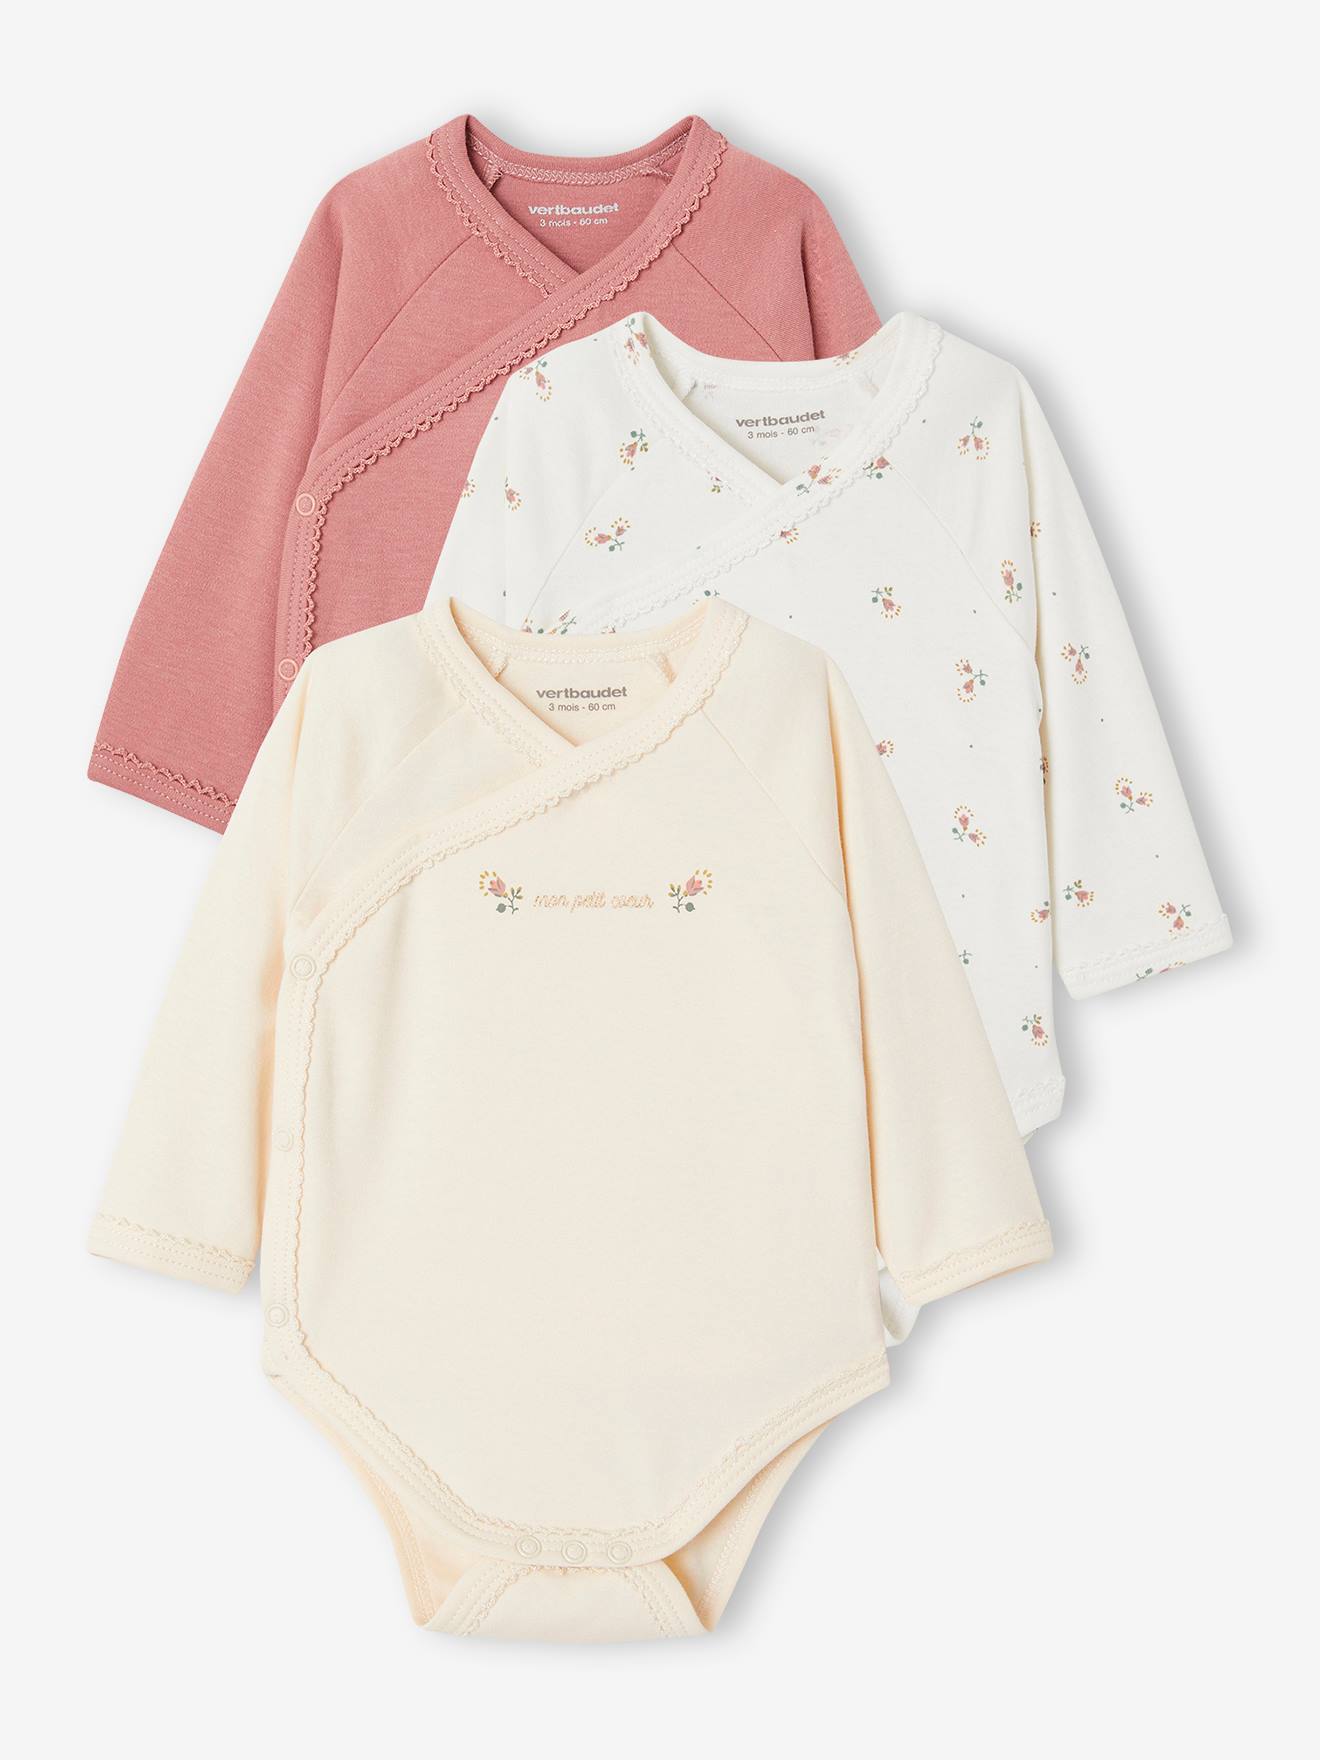 Pack of 3 Assorted "Joli Coeur" Bodysuits in Organic Cotton for Newborns old rose